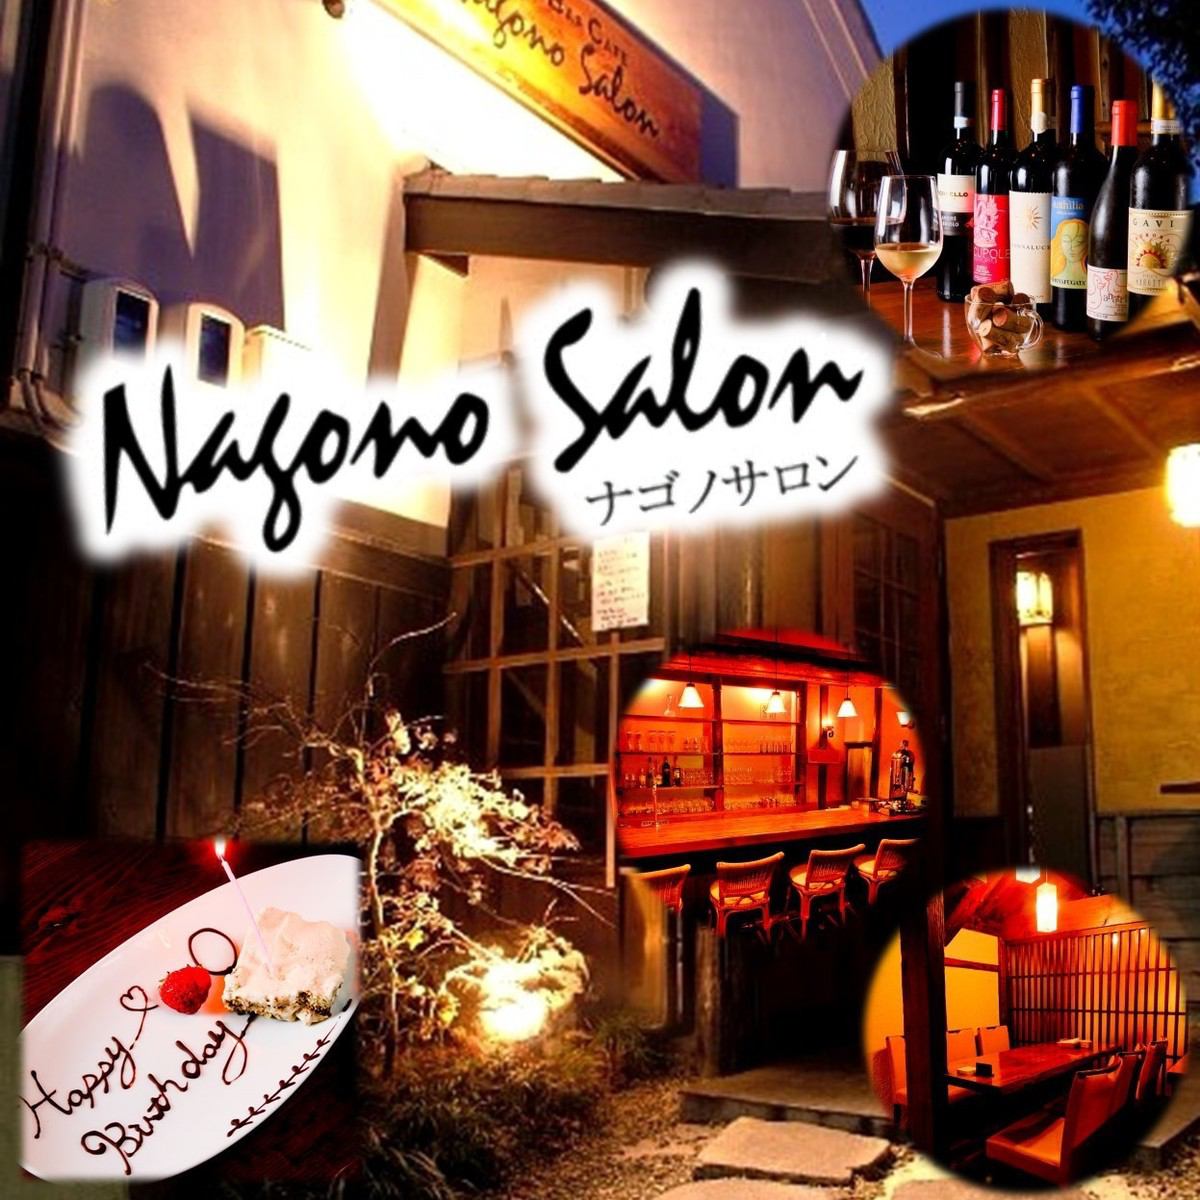 Authentic Italian restaurant in a house located in the Nagono area Date / Banquet / Entertainment / Anniversary